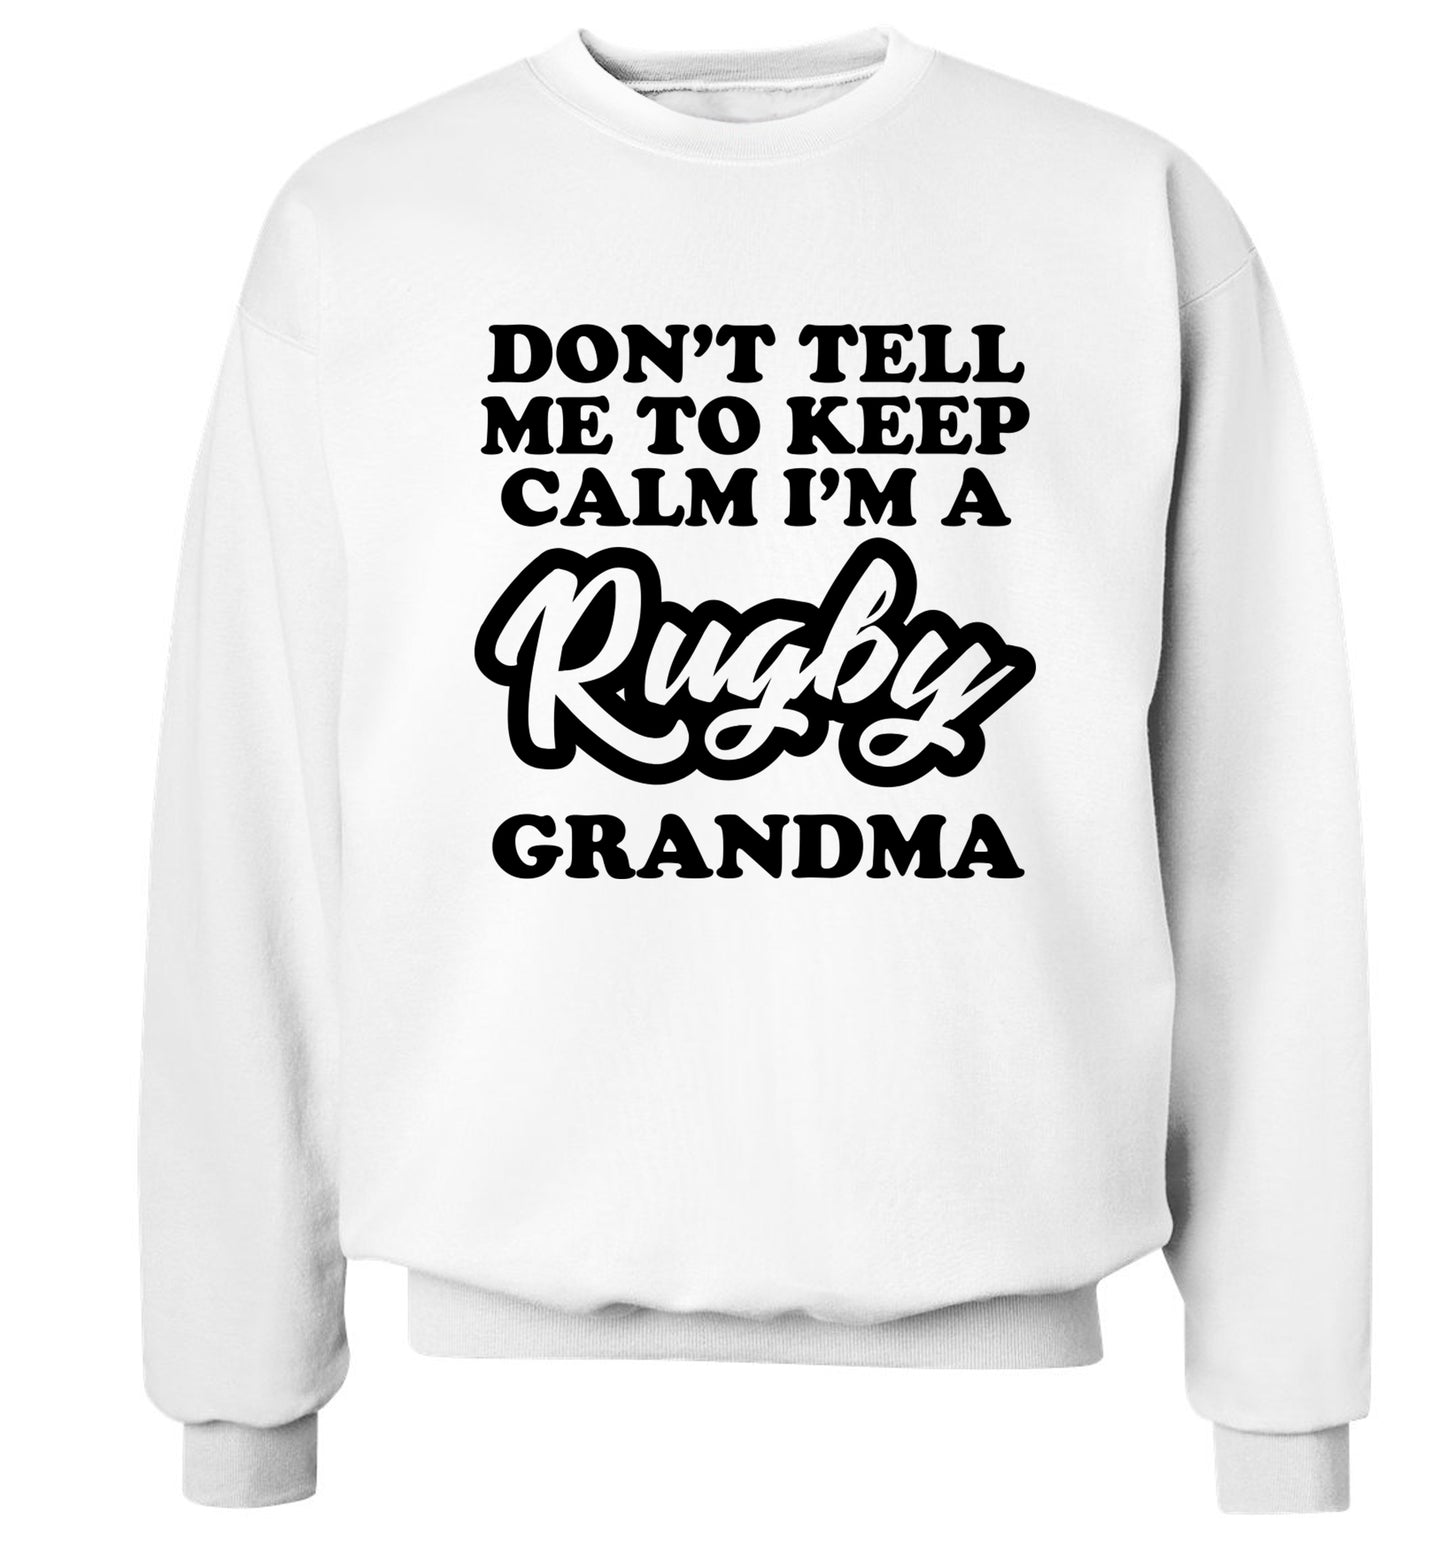 Don't tell me to keep calm I'm a rugby grandma Adult's unisex white Sweater 2XL